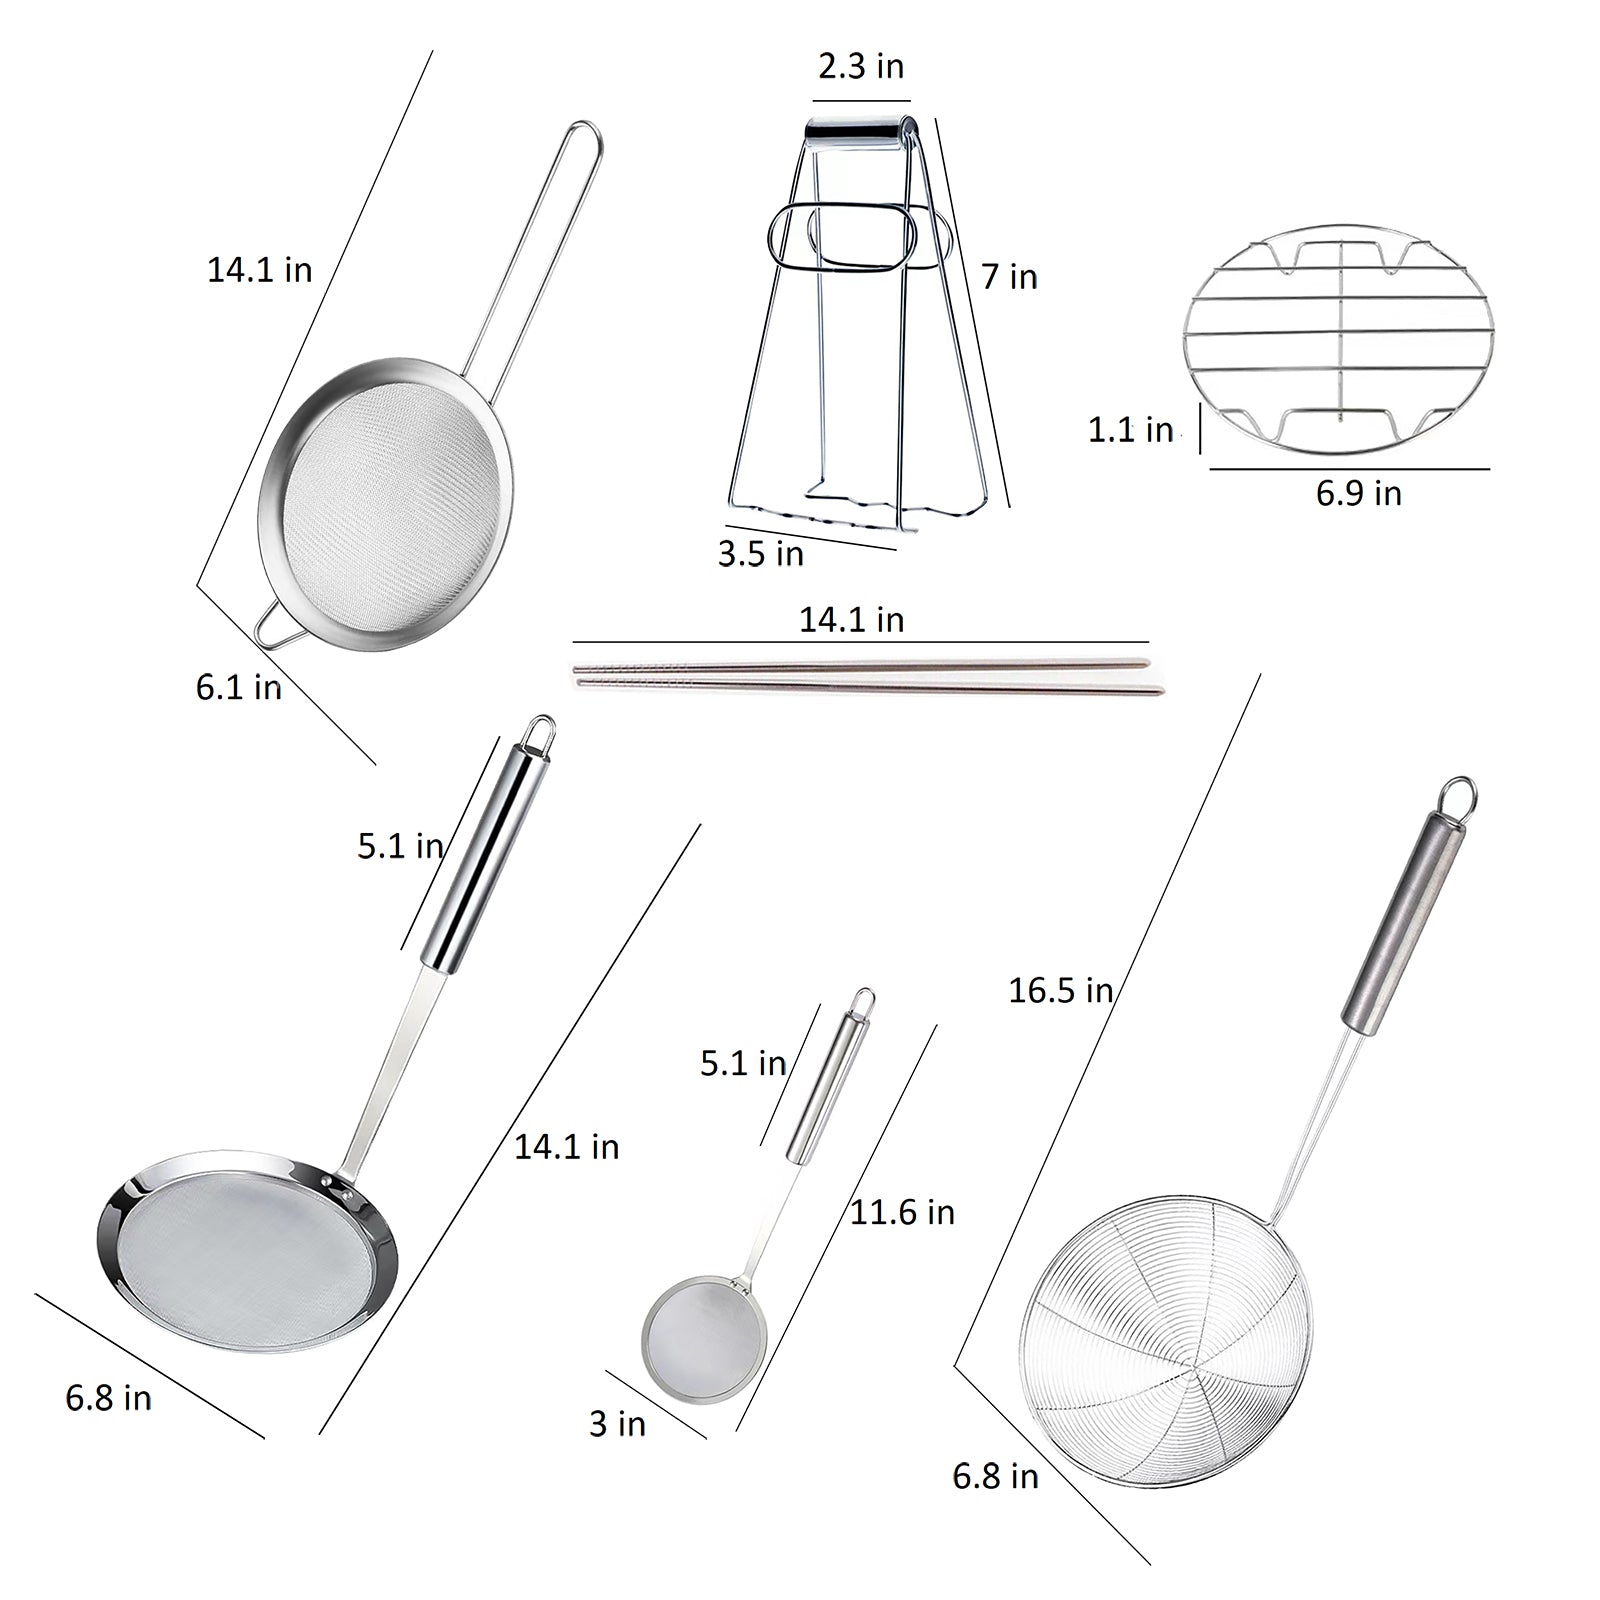 Chinese Cooking Utensil Set (7 Pieces)